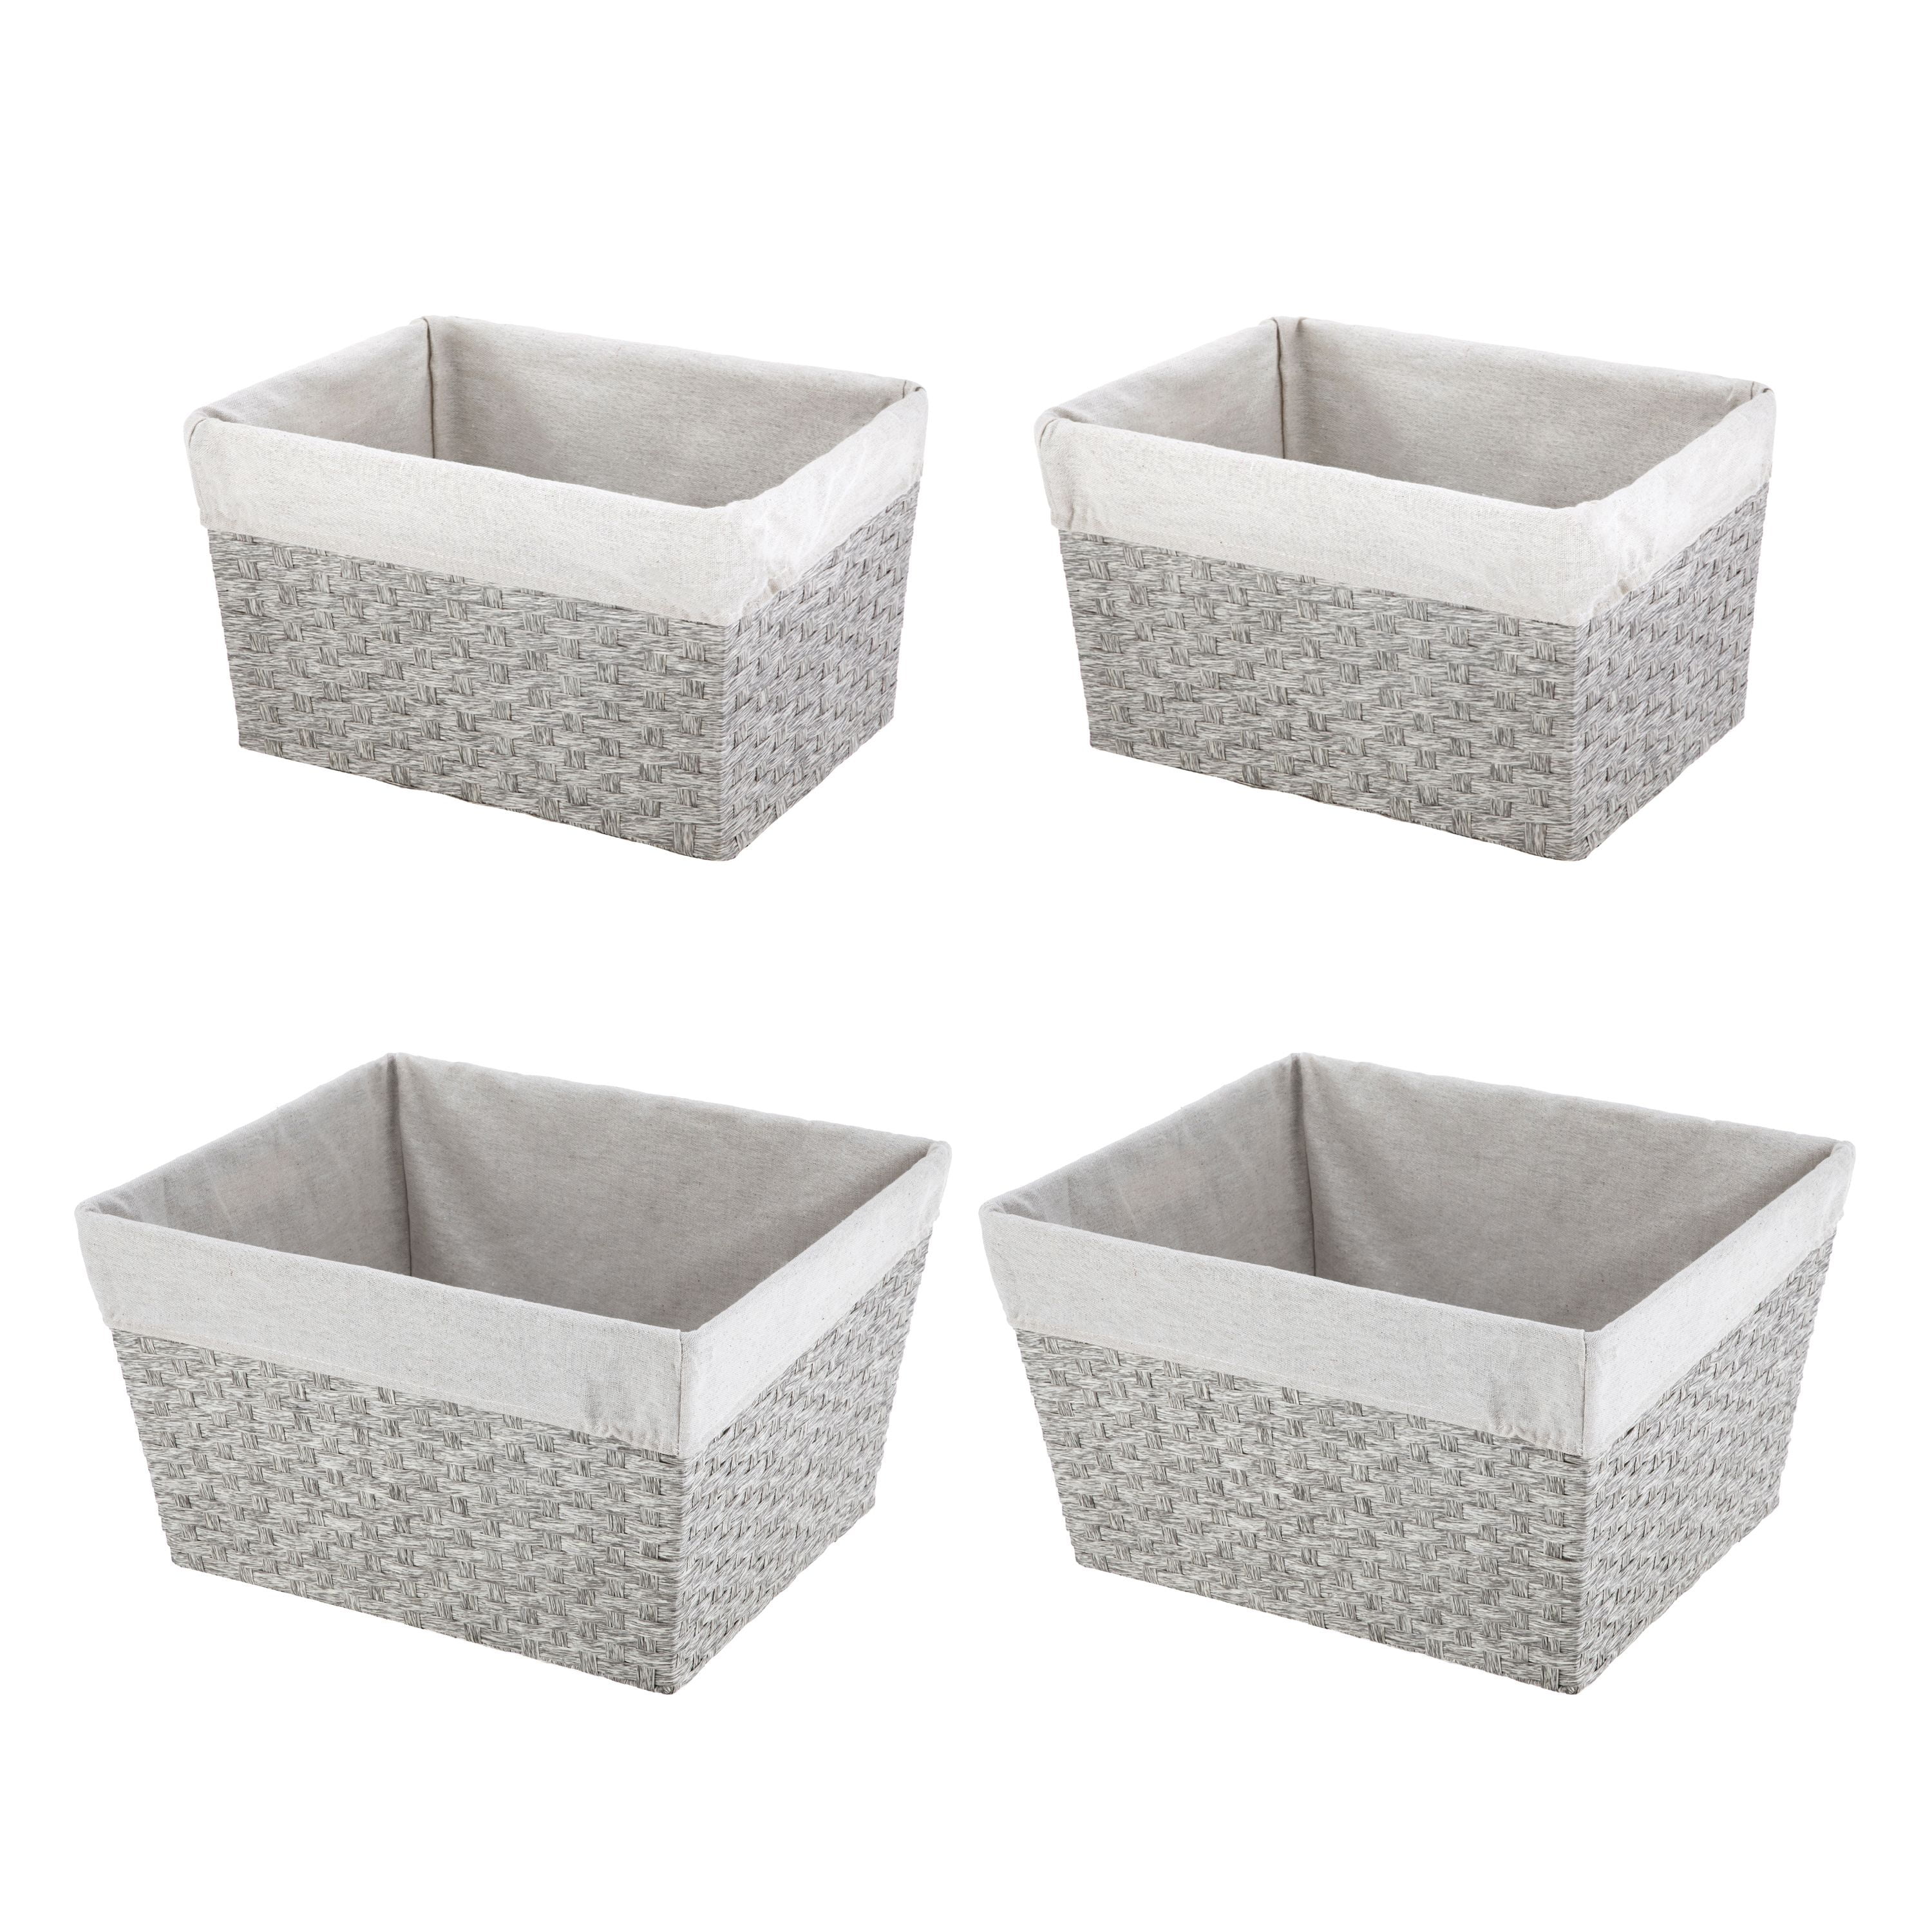 Large Small Medium ARPAN Paper Rope Woven Storage Xmas Hamper Basket Box with White Cloth Lining Set of 3 